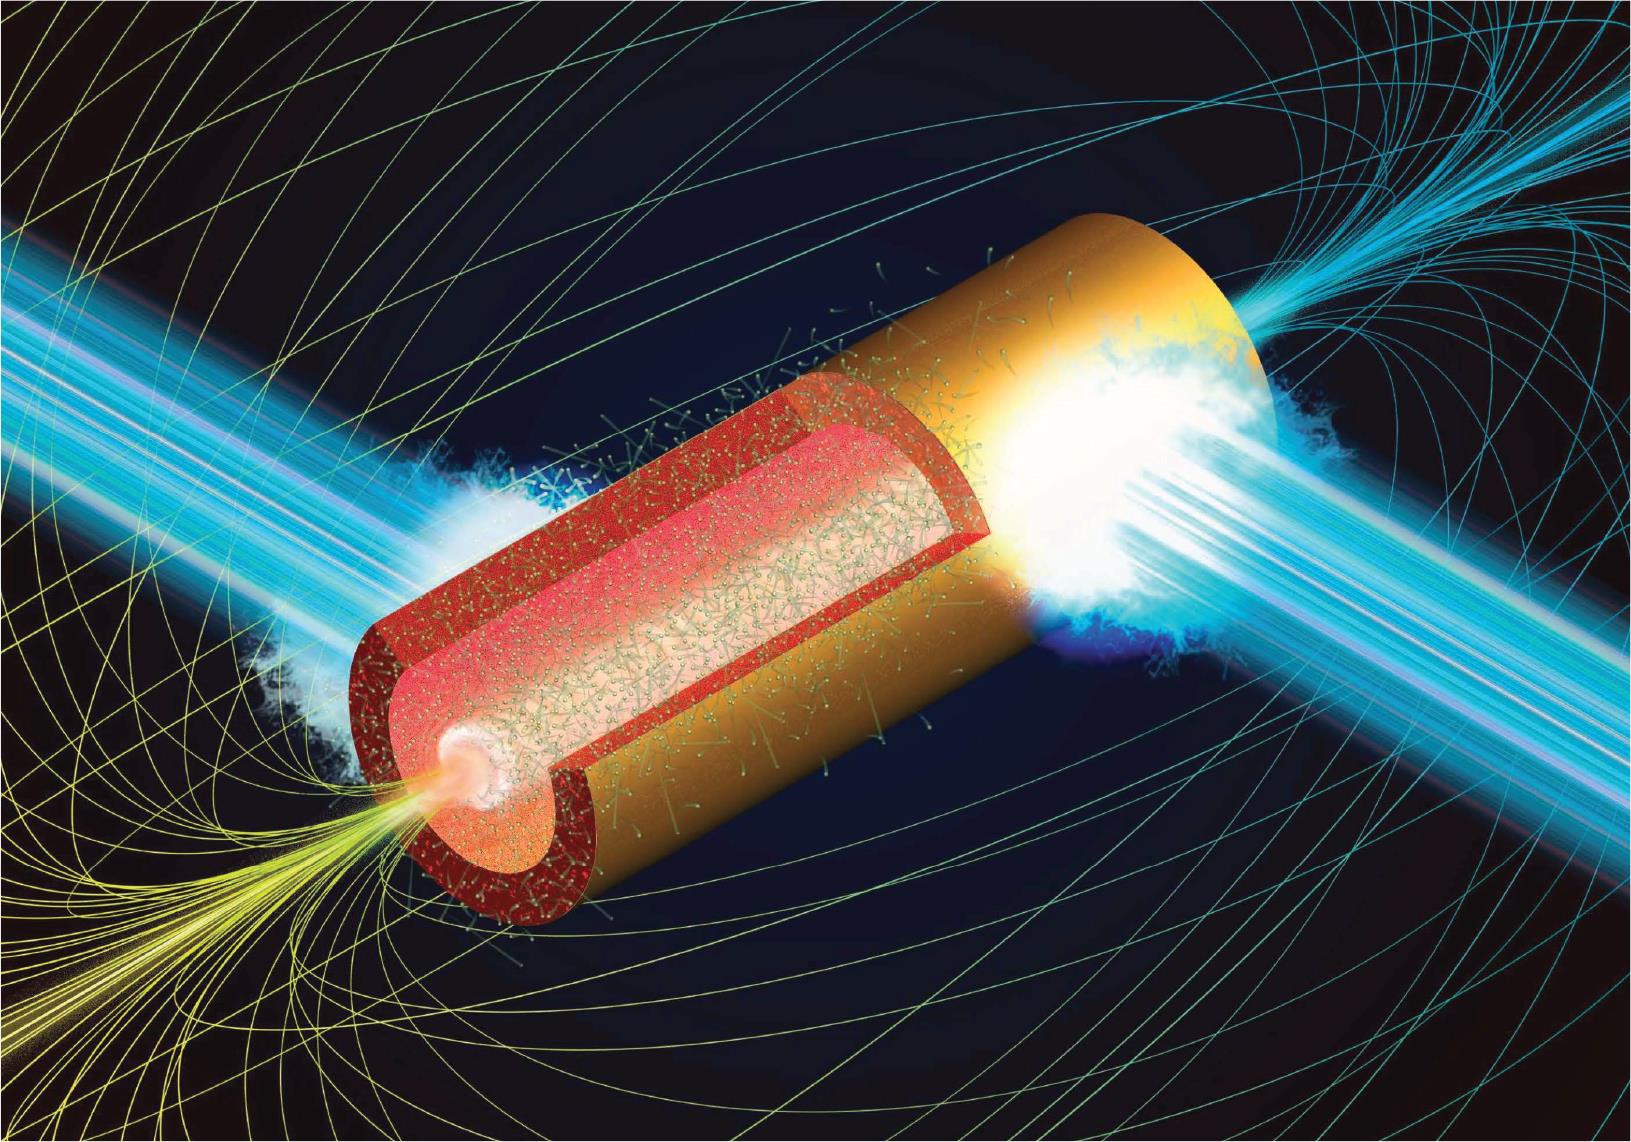 Illustration of a microtube implosion. Due to the laser-produced hot electrons with megaelectron volt energies, cold ions in the inner wall surface implode toward the central axis. By pre-seeding uniform magnetic fields of the kilotesla order, the Lorentz force induces a Larmor gyromotion of the imploding ions and electrons. Due to the resultant collective motion of relativistic charged particles around the central axis, strong spin currents of approximately peta-ampere/cm are produced with a few tens of nm size, generating megatesla-order magnetic fields.